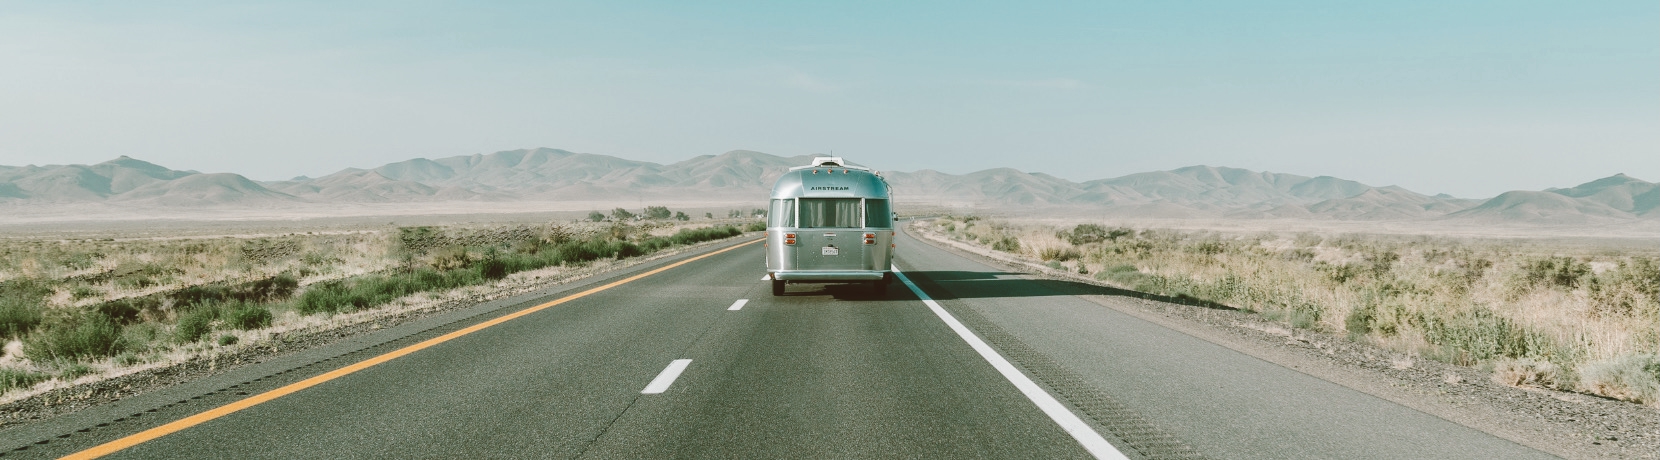 Airstream camper driving down the road